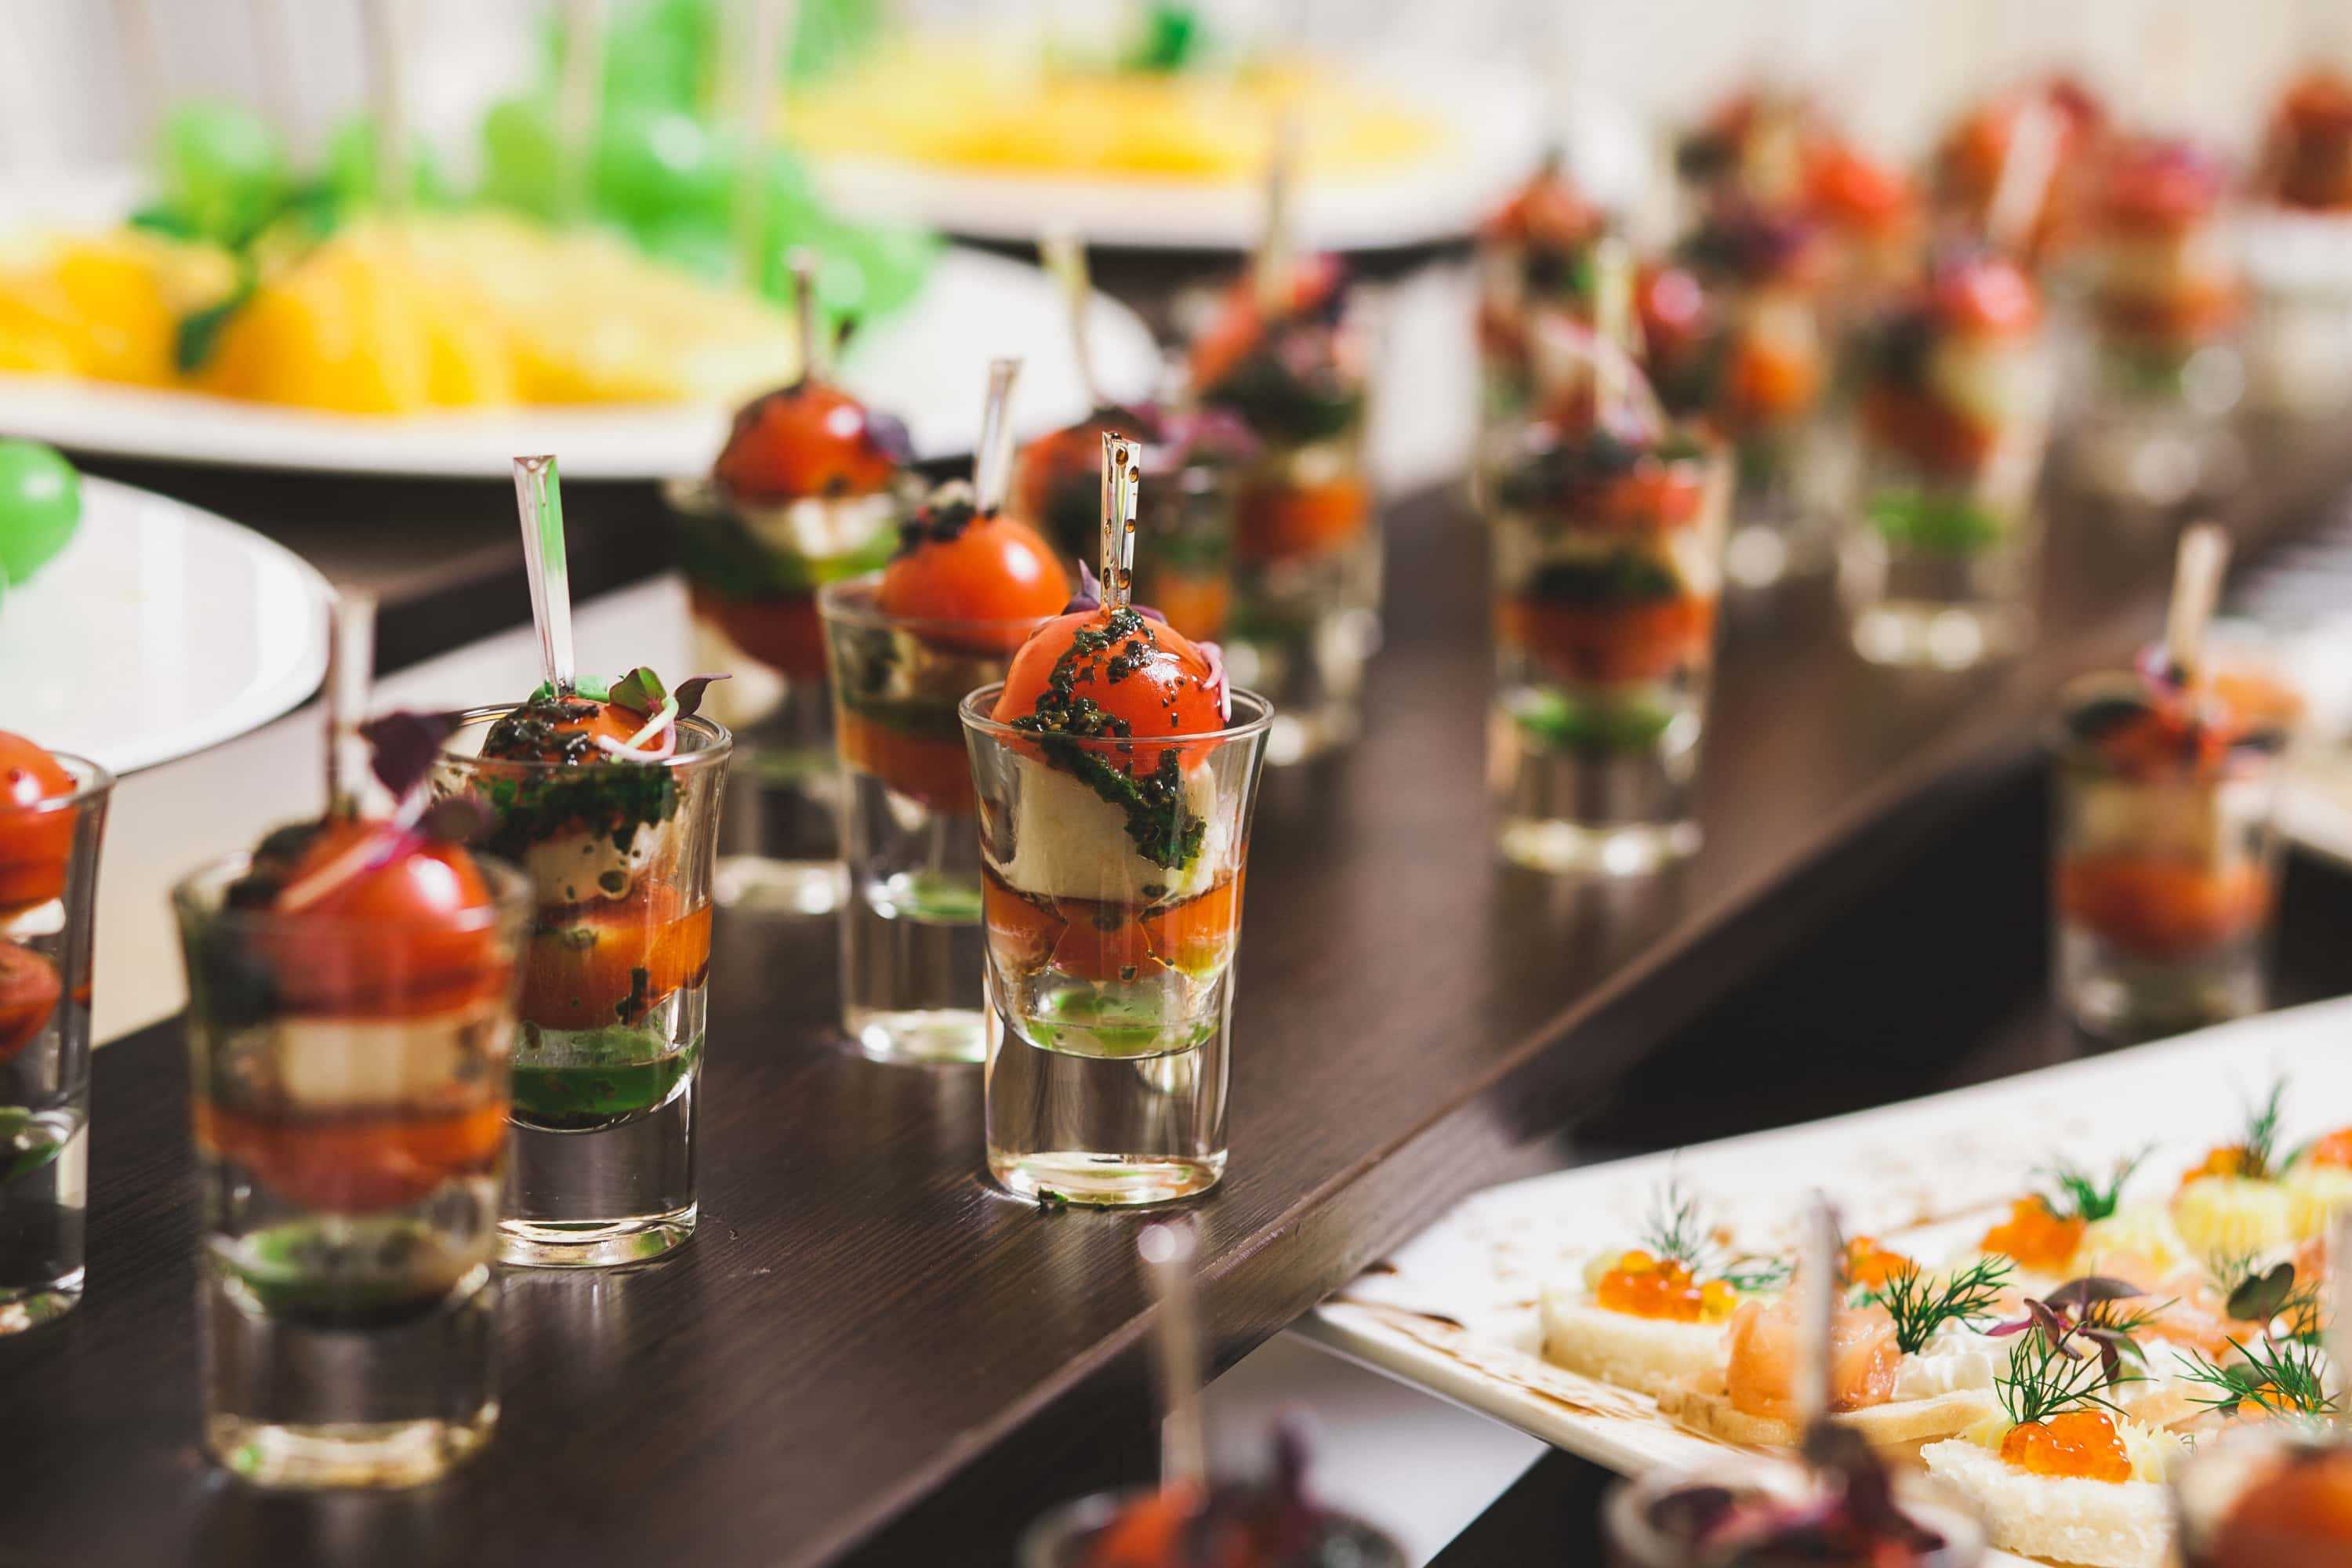 How to Pull Off a Catered Holiday Event – Or Any Catered Event